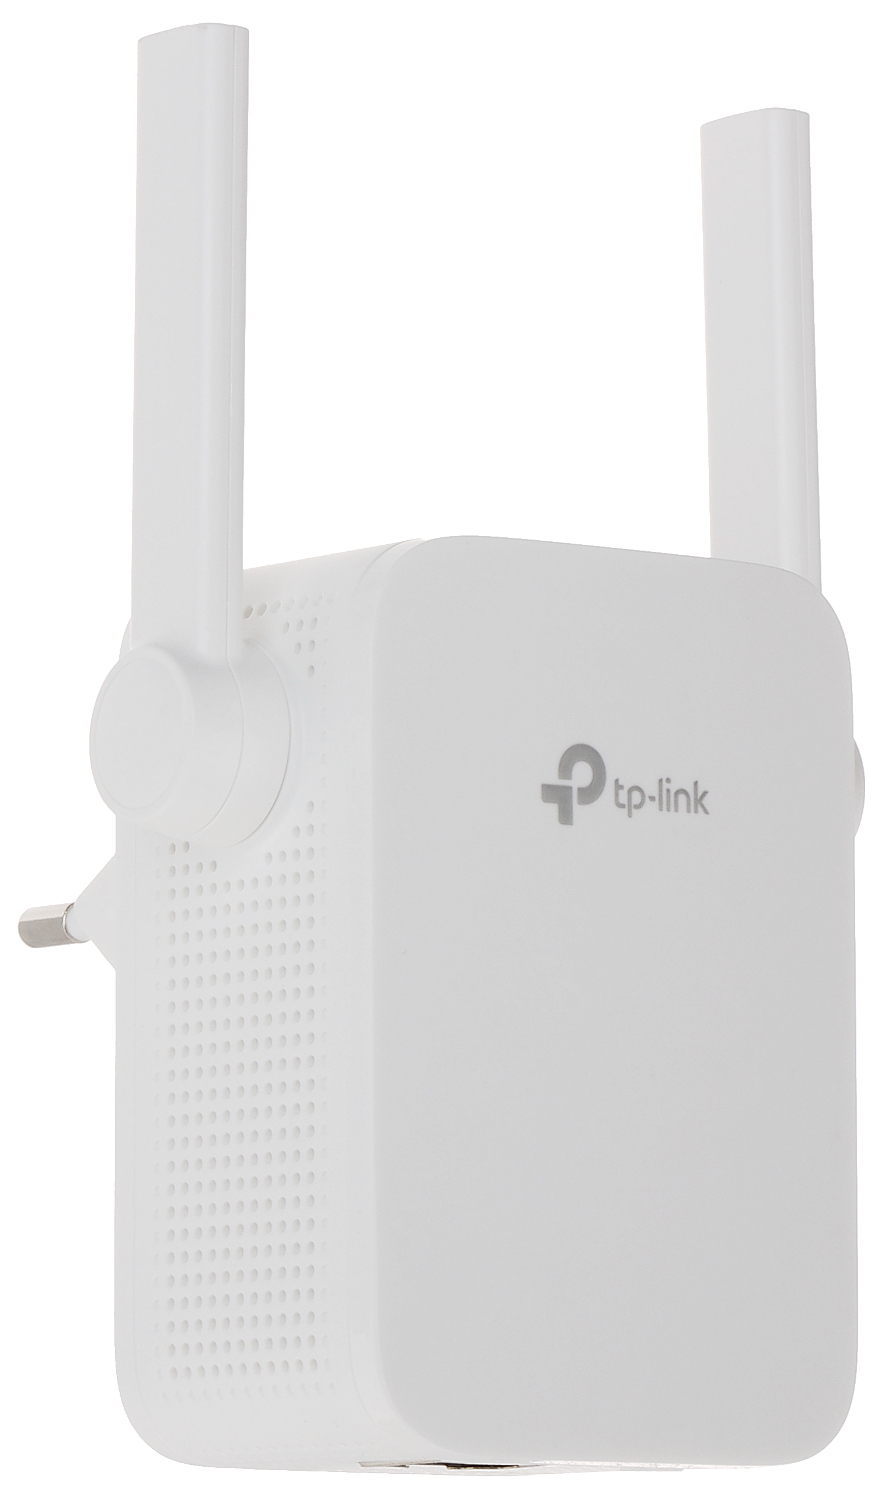 Universal Wi Fi Range Extender Tl Wa855re 300mb S 2 4 Routers 2 4 Ghz And 5 Ghz Access Points Delta